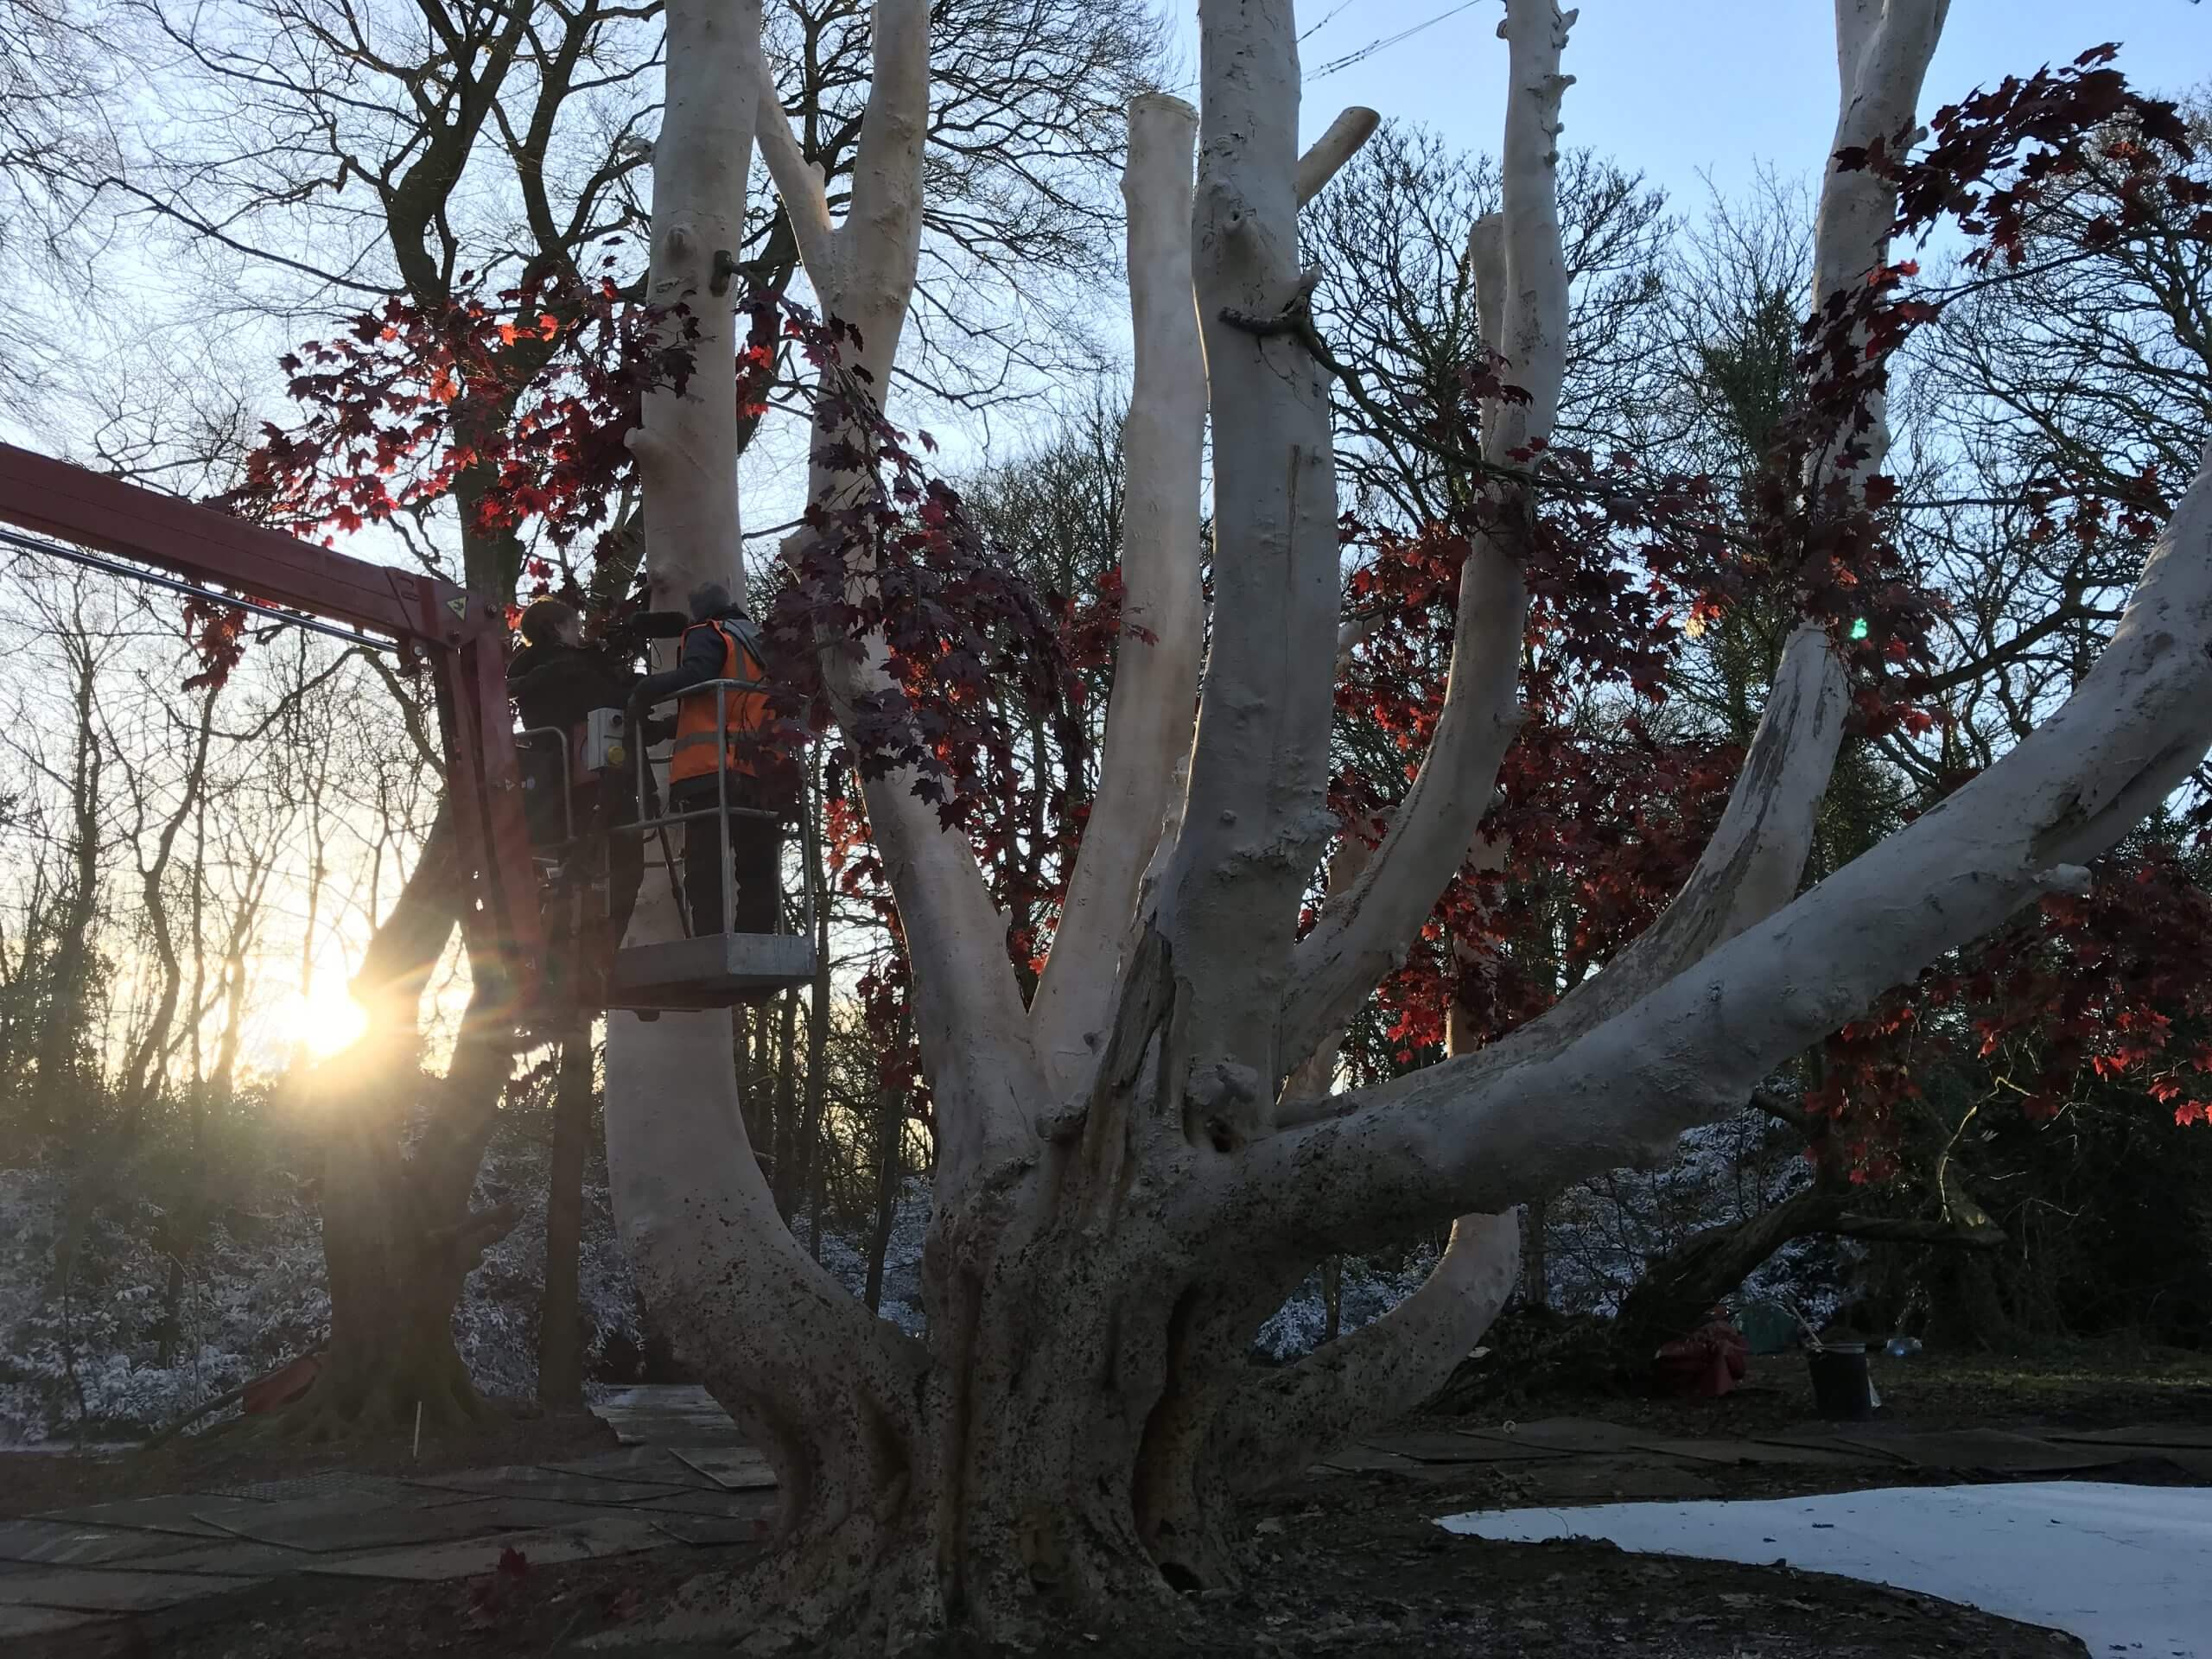 Production still from Game of Thrones: The Last Watch. Jeanie Finlay standing with her back to the camera. She is standing in a cherry picker's cradle and is filming The Godswood Tree, which has a massive white trunk and red leaves.